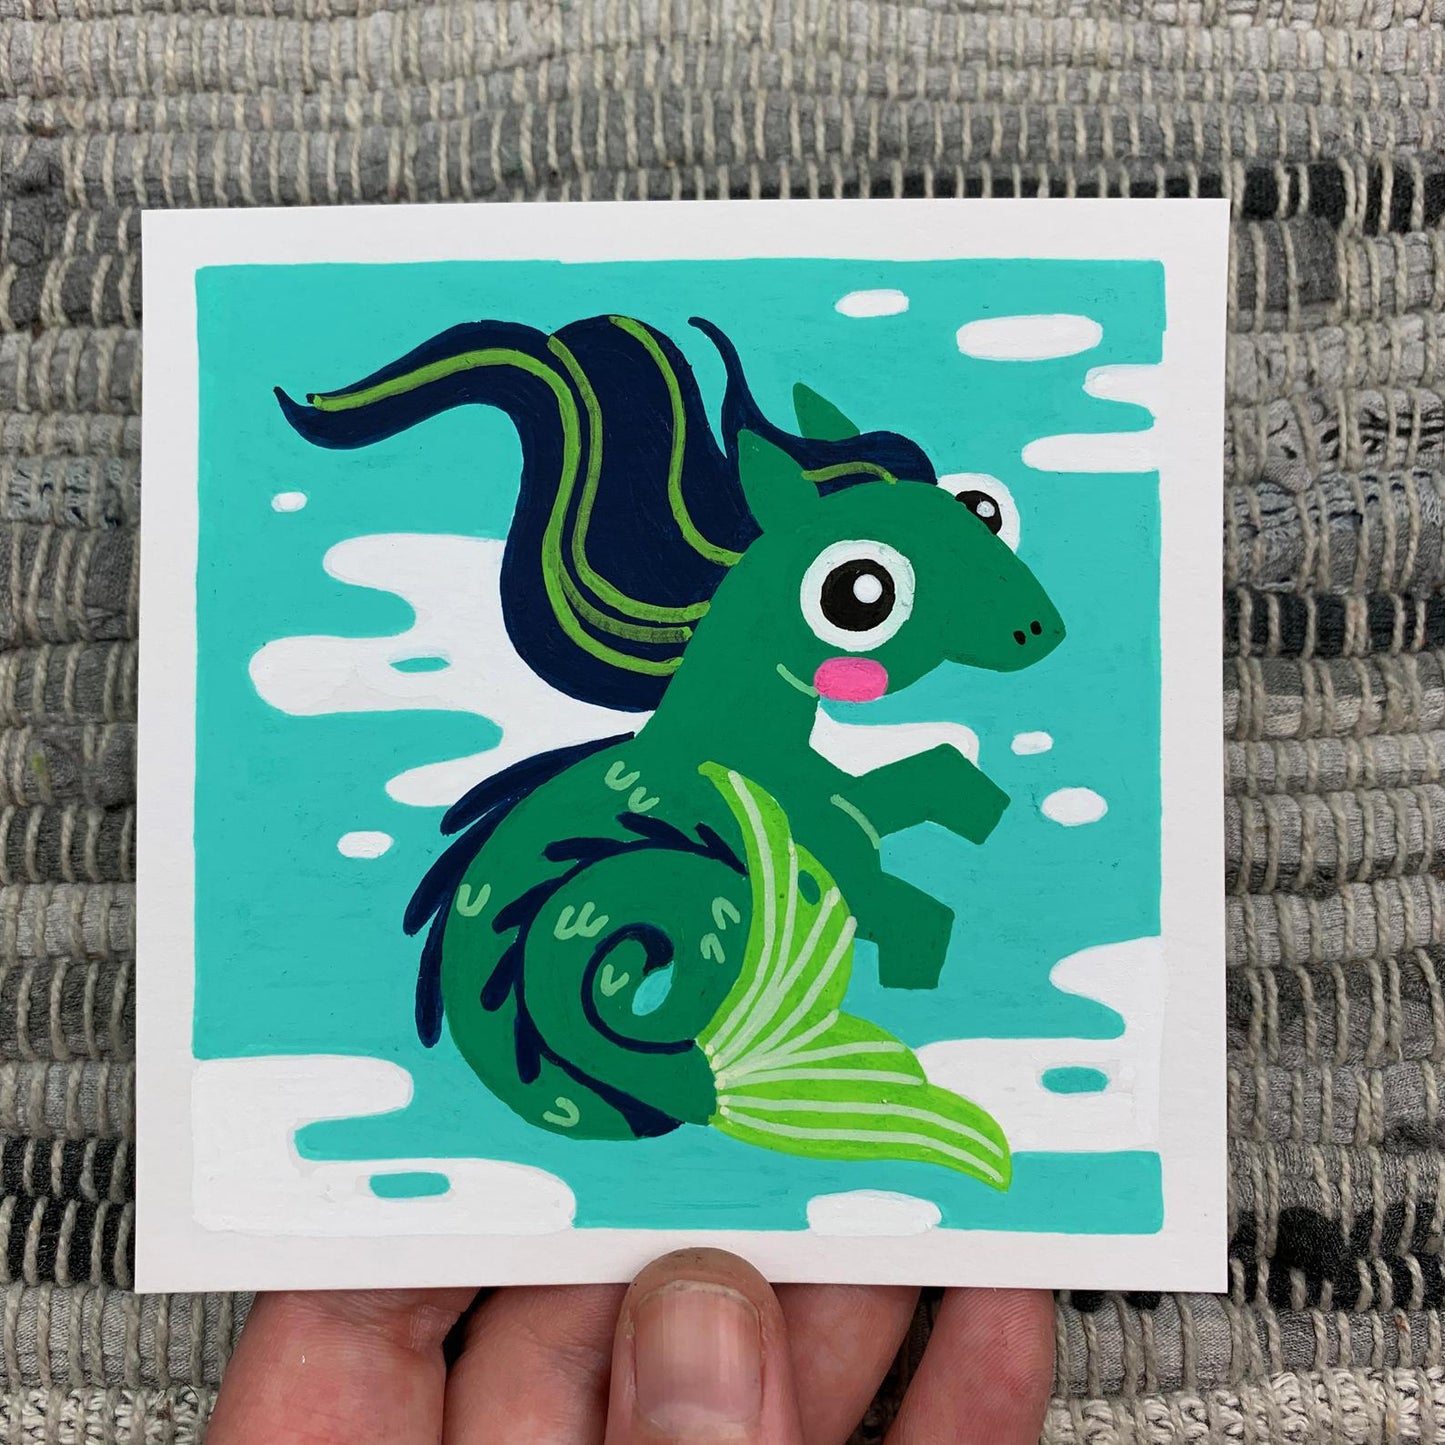 Original artwork of a cute green mythical hippocampus creature. Materials used: Uni-Posca paint markers.